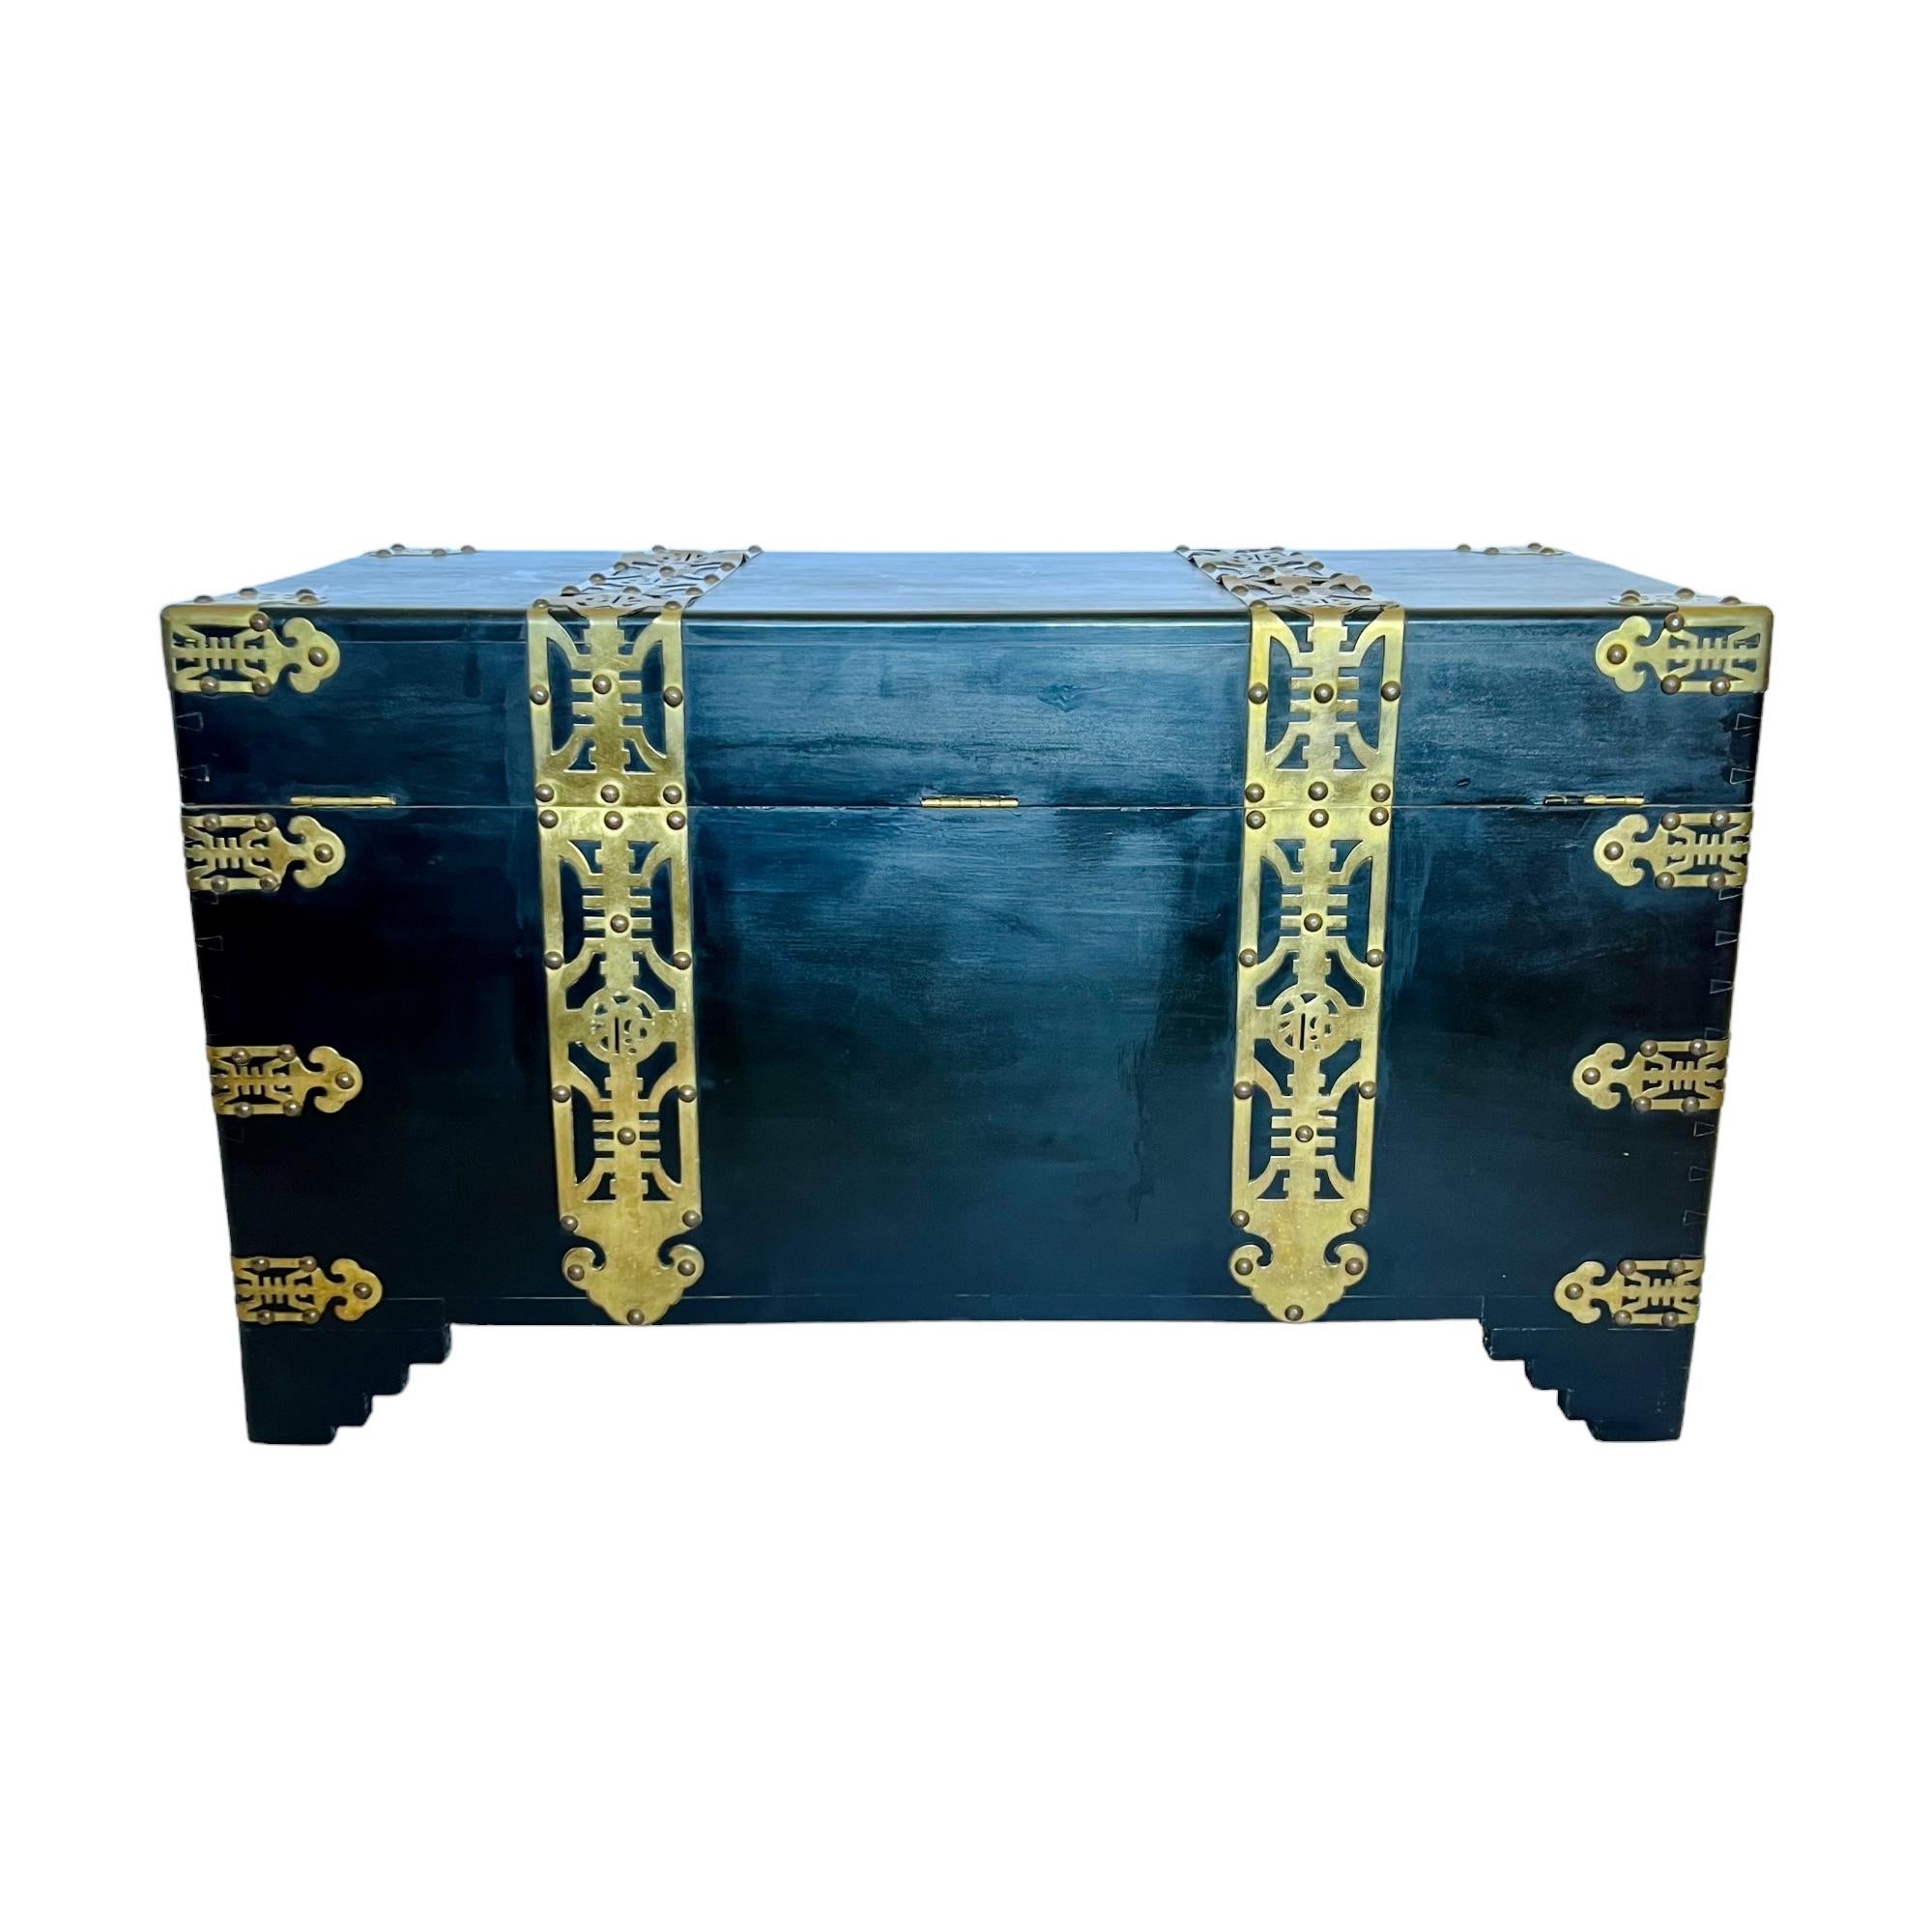 Chinese Black Lacquer Brass Bound Trunk, Early 20th C. For Sale 2